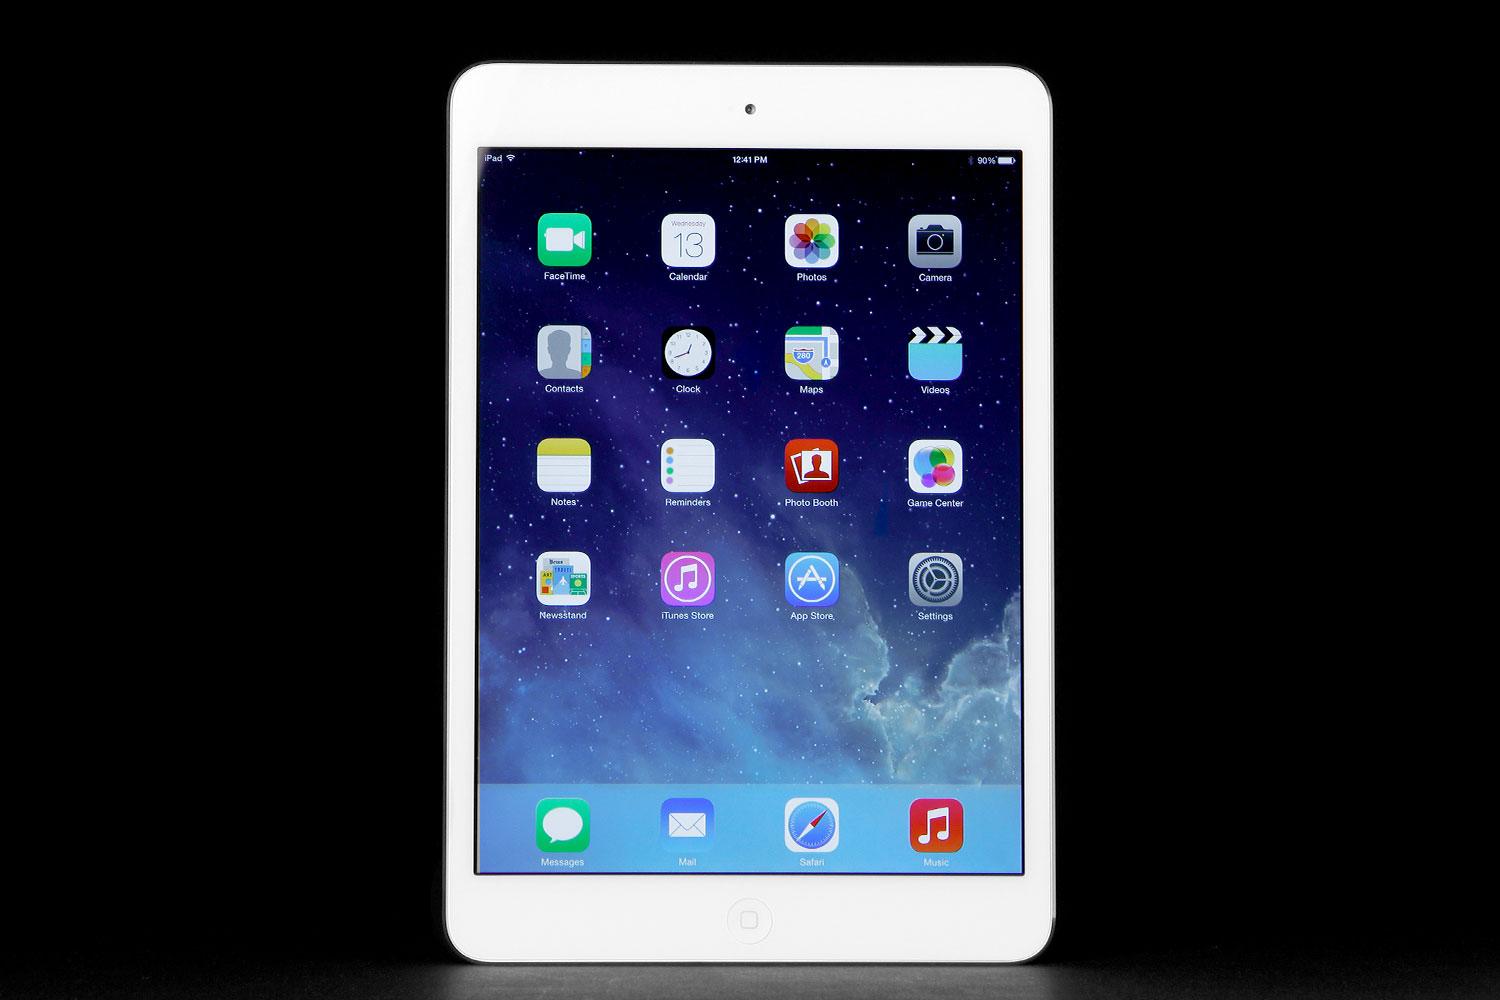 Apple iPad Mini 2 Reviews, Pros and Cons